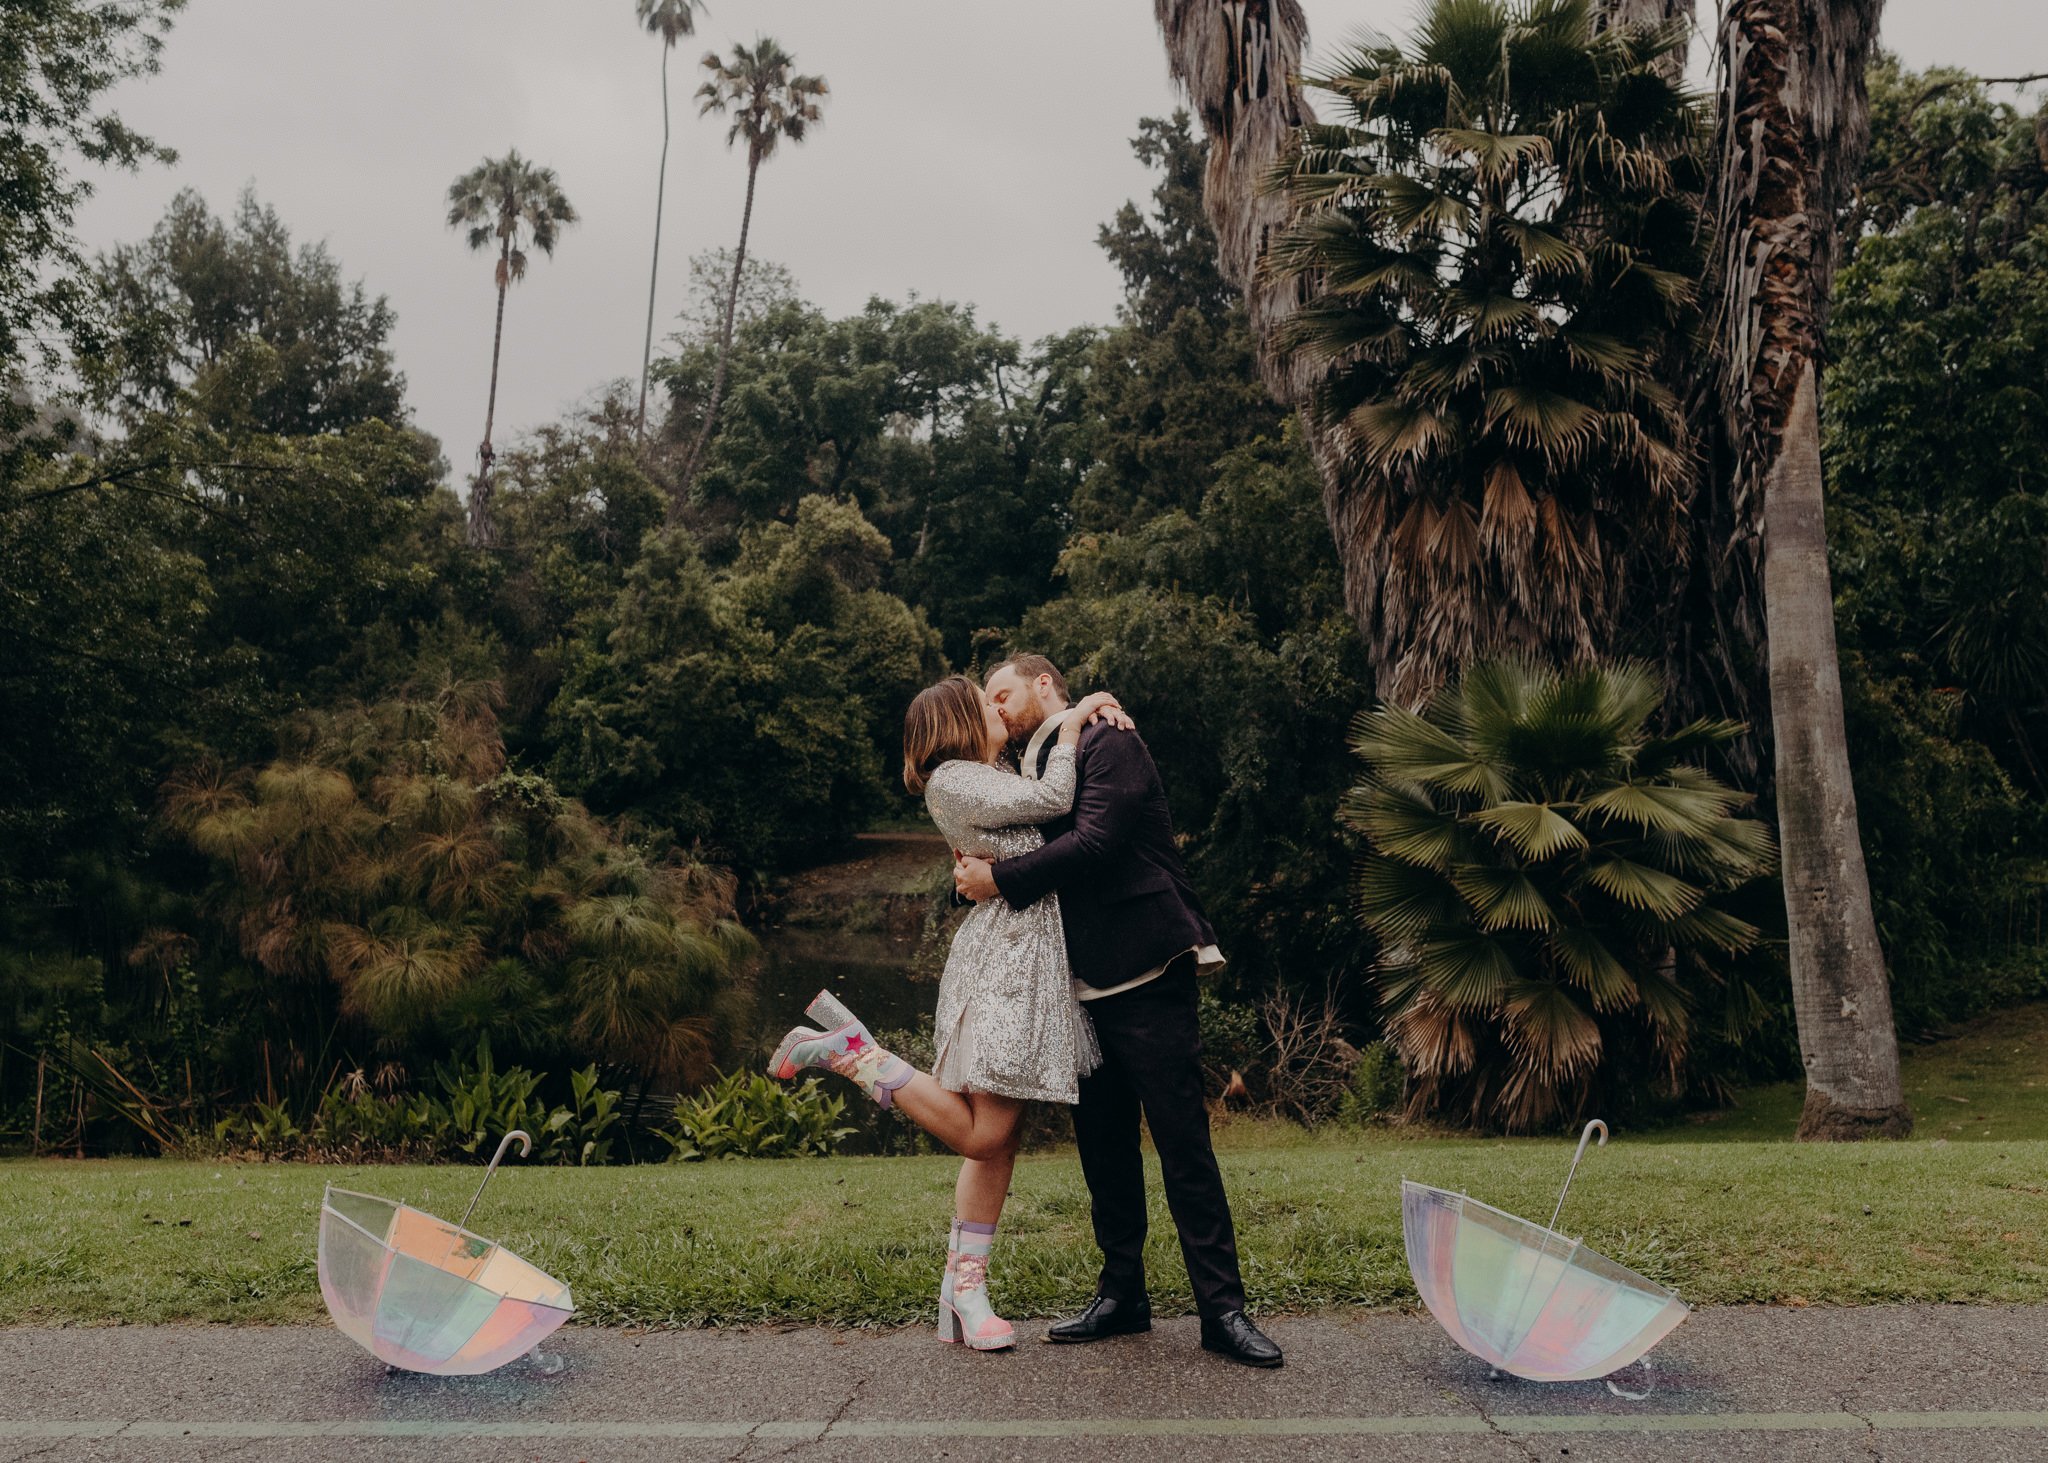 queer wedding photographers in los angeles - candid engagement session - itlaphoto.com-63.jpg